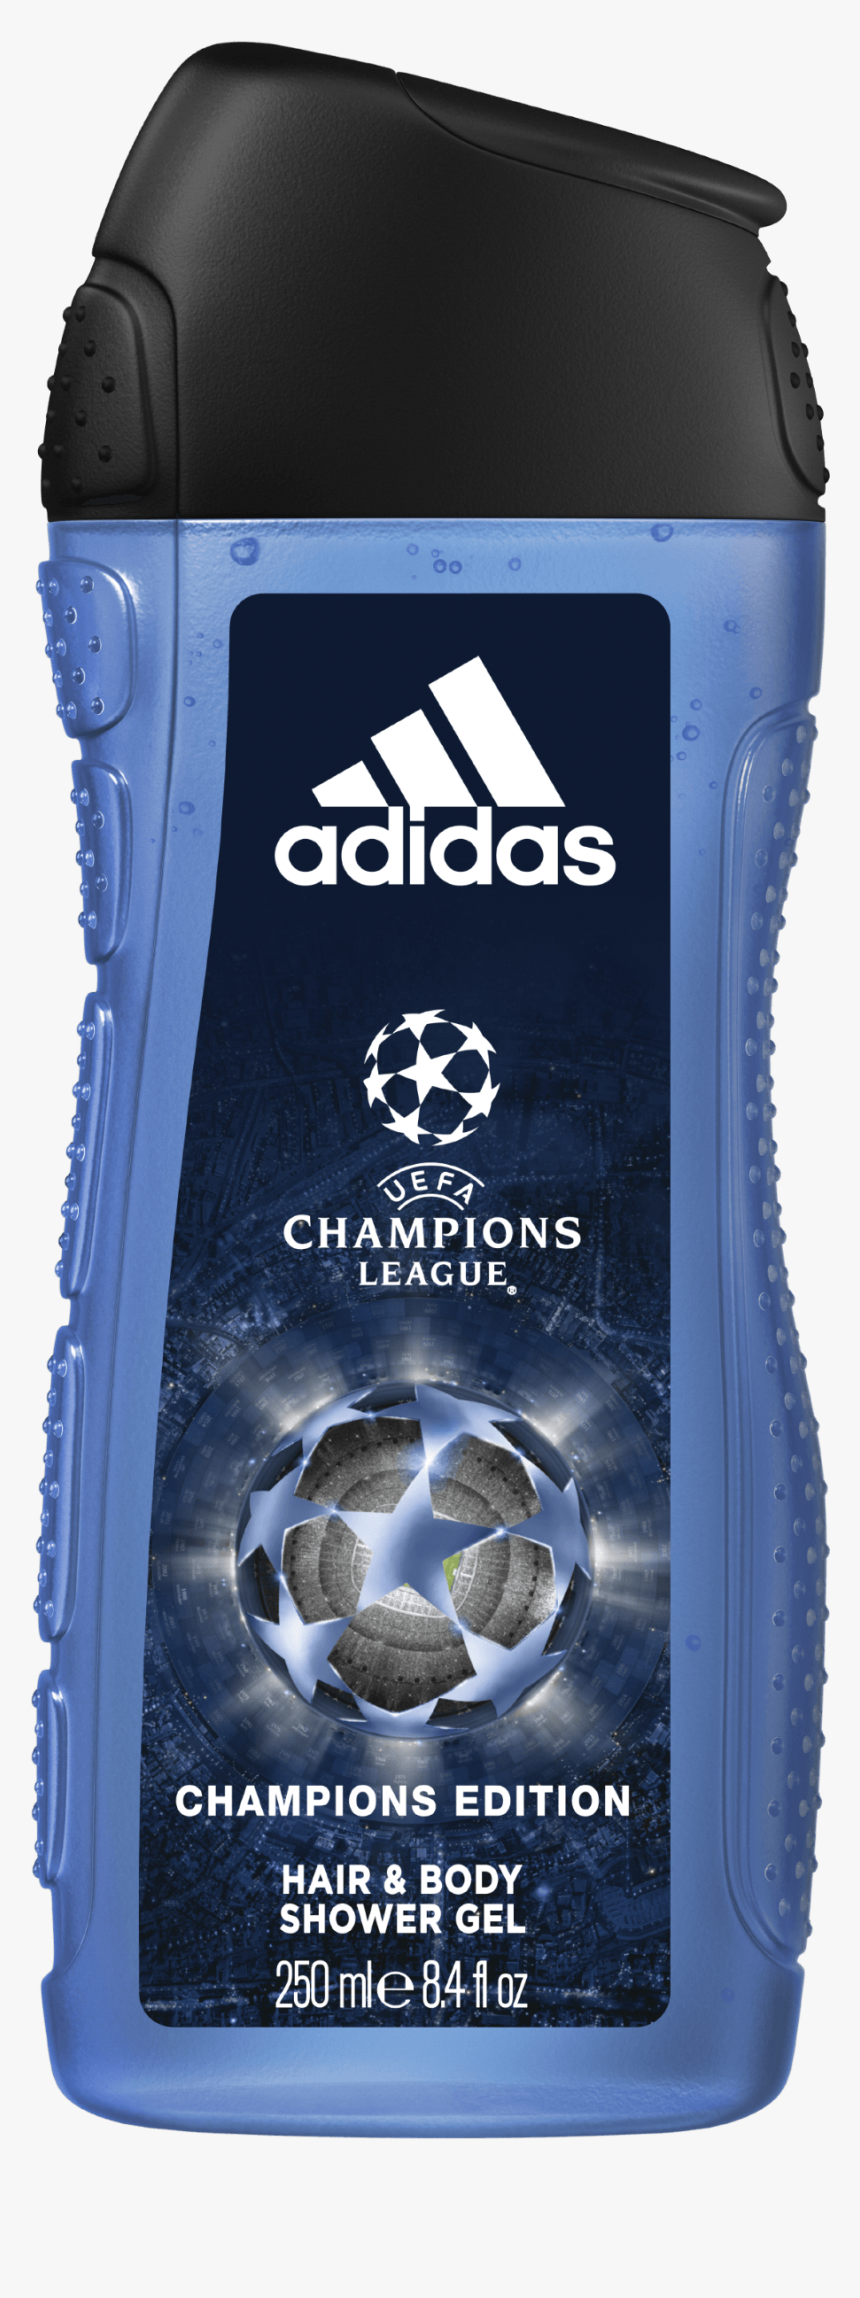 Uefa Champions League Champions Edition 2in1 Hair And - Adidas Champions Edition Shower Gel, HD Png Download, Free Download